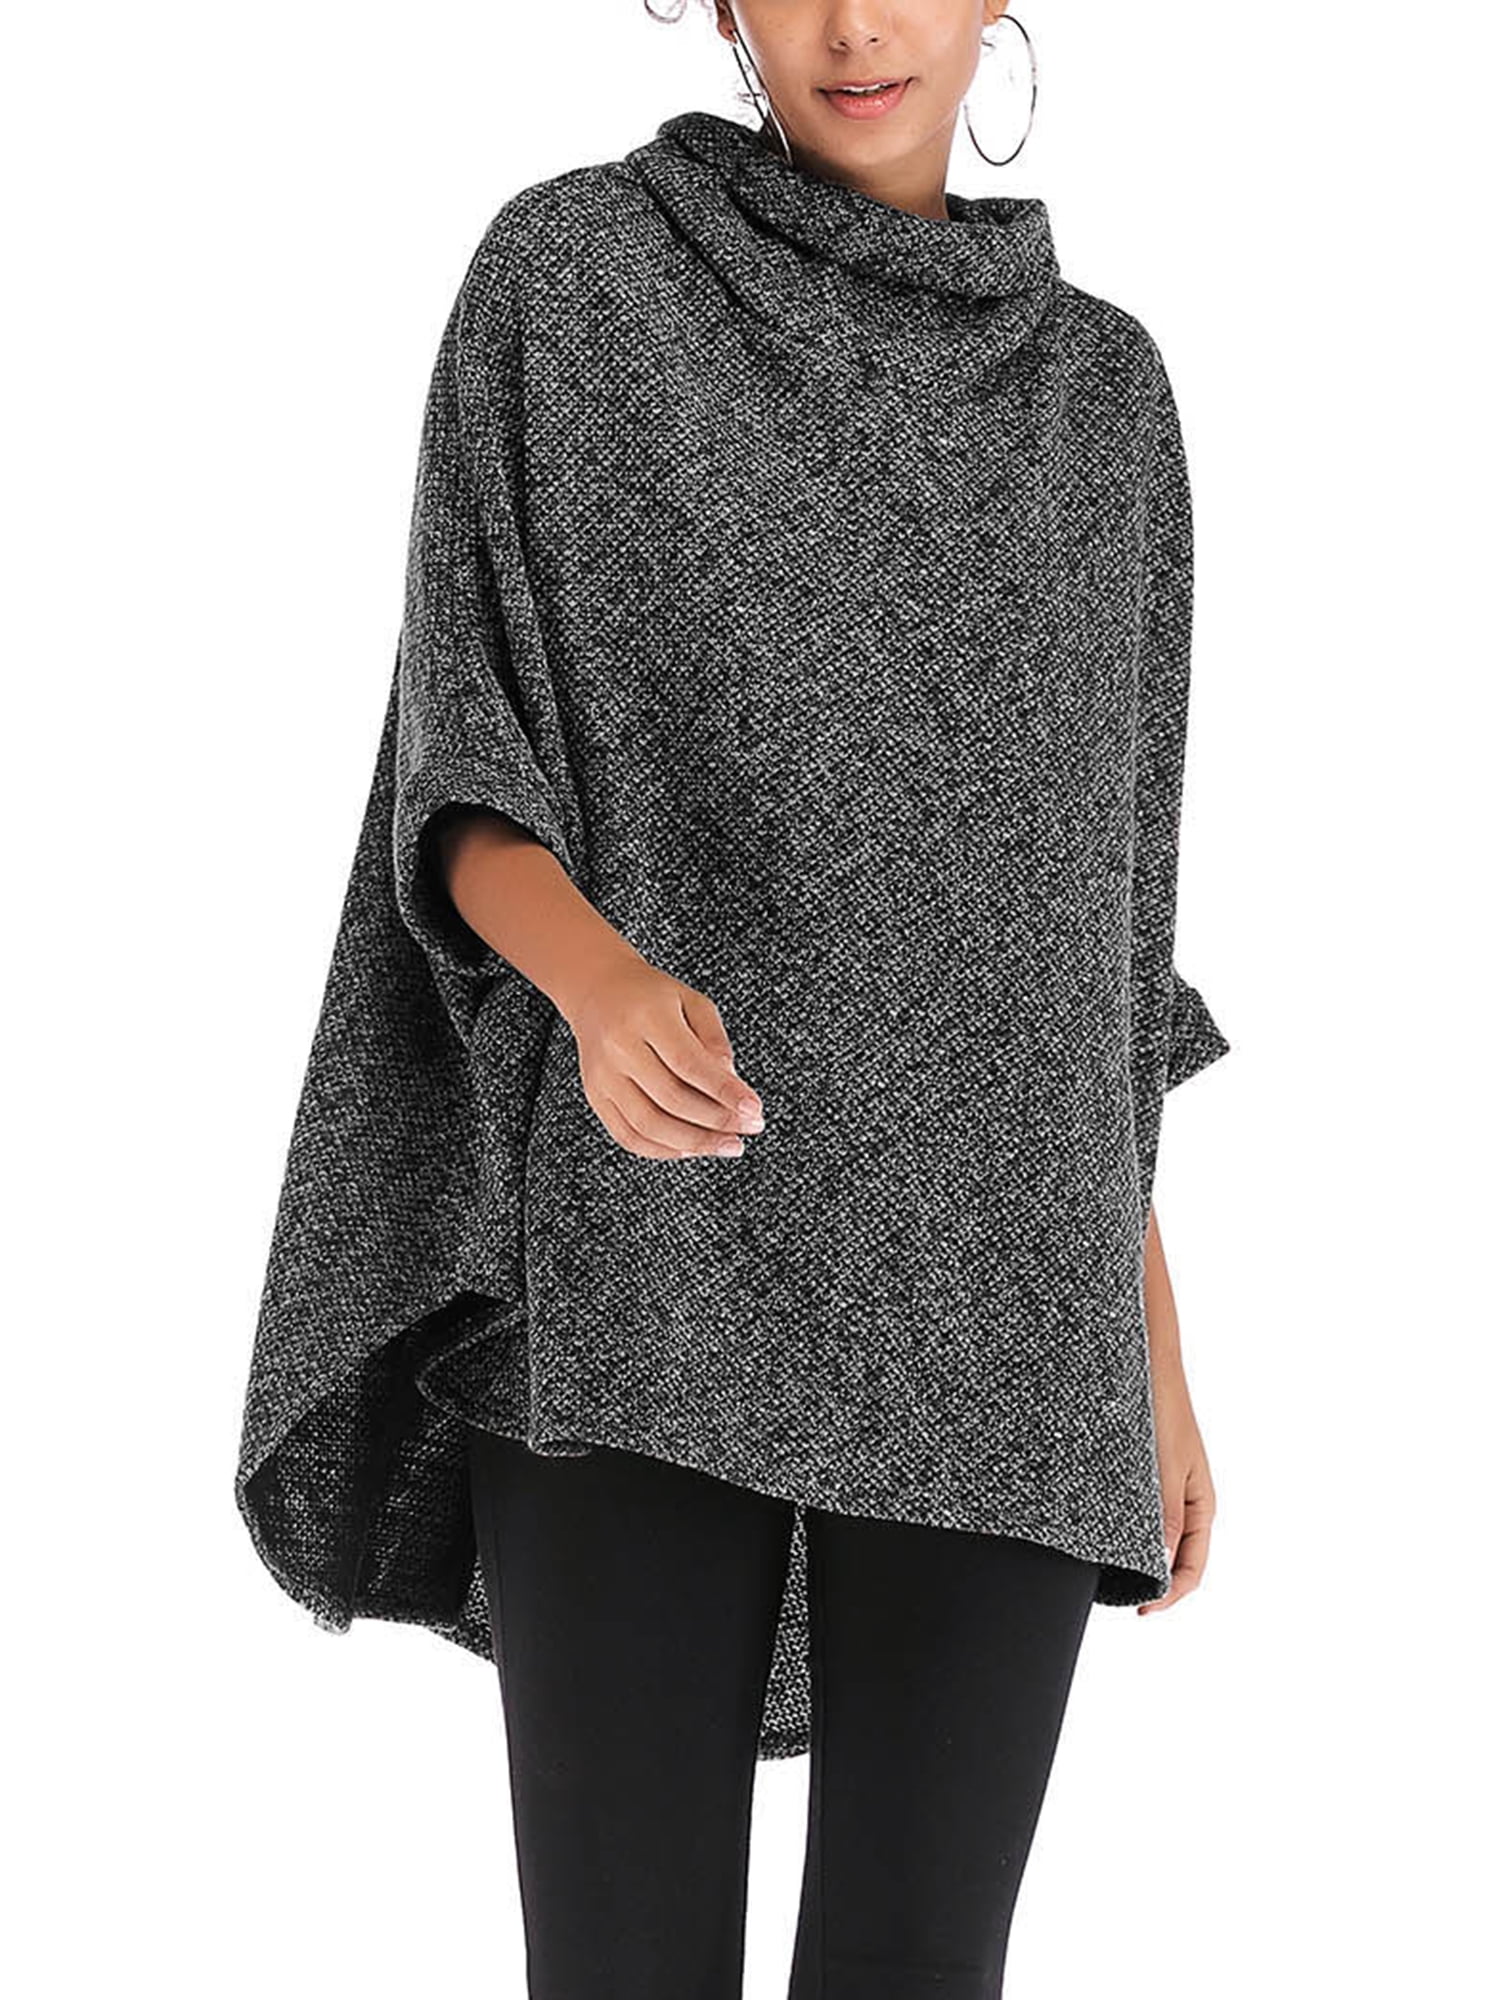 Womens Poncho Winter Pancho Knitted Poncho Capes Shawl Cardigans ...